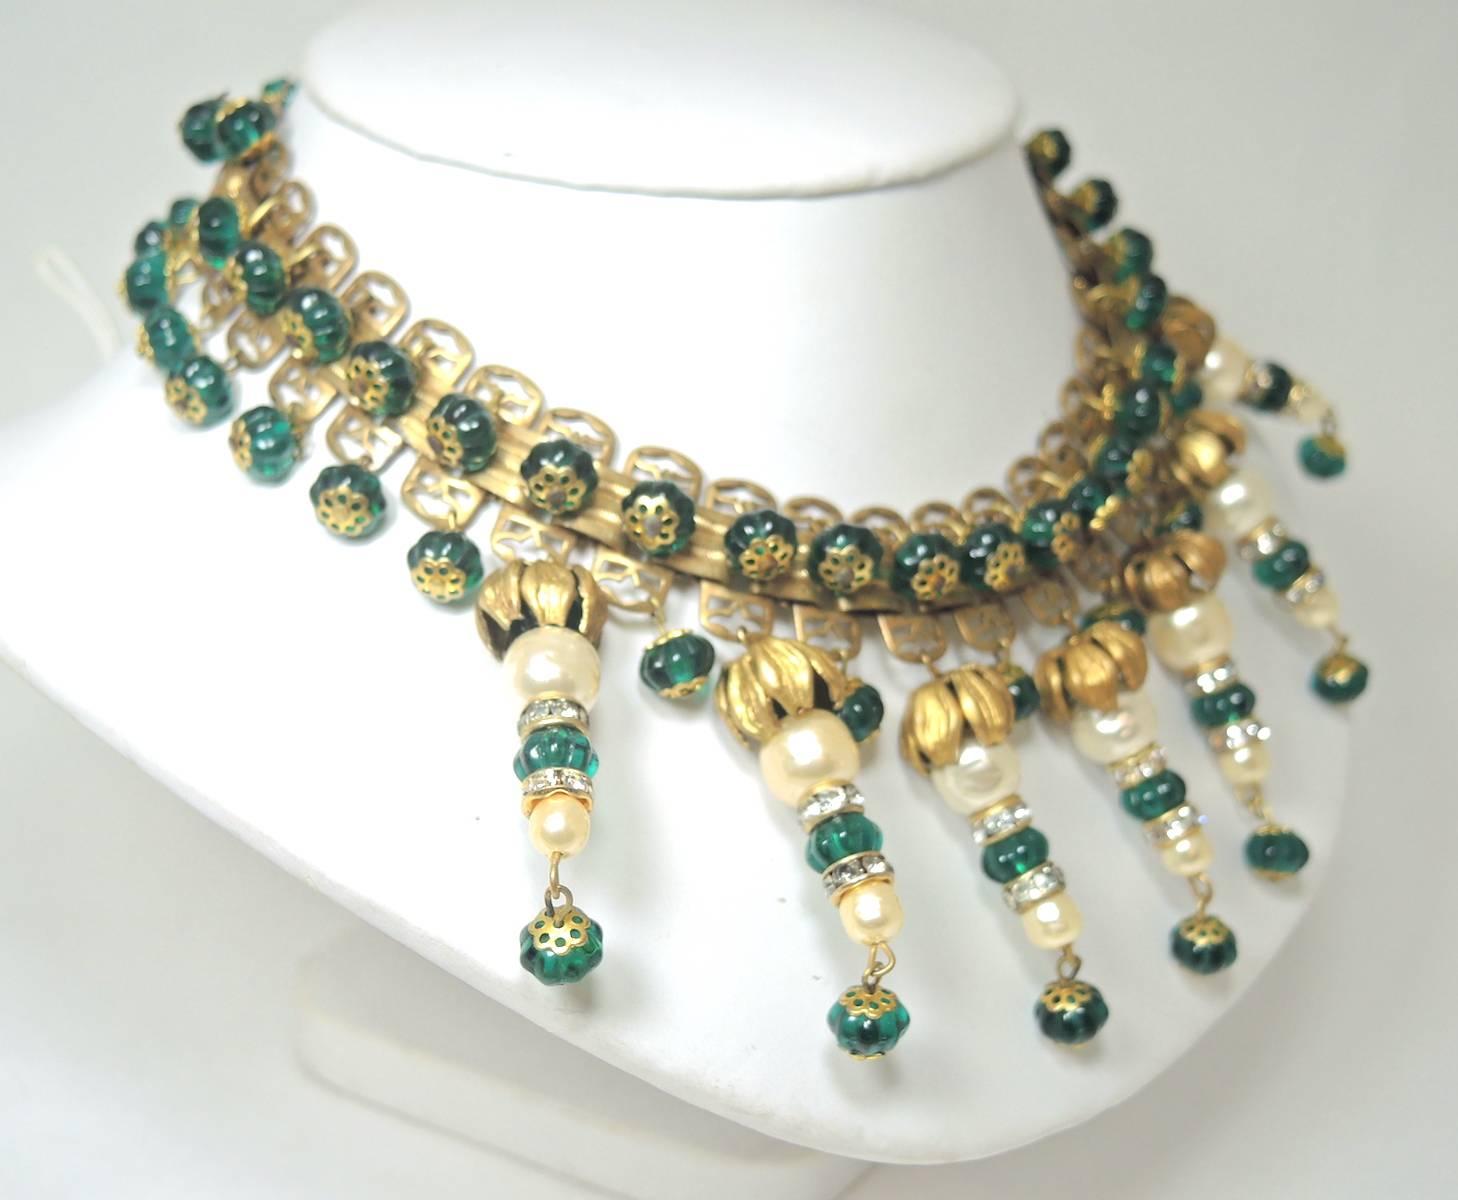 This is a spectacular vintage 1940s French necklace that was made with green Gripoix glass drops. They are spaced by faux pearls and rhondell bead caps. These dangling beauties are connected to a gold tone setting. This necklace measures 16” x 1”. 